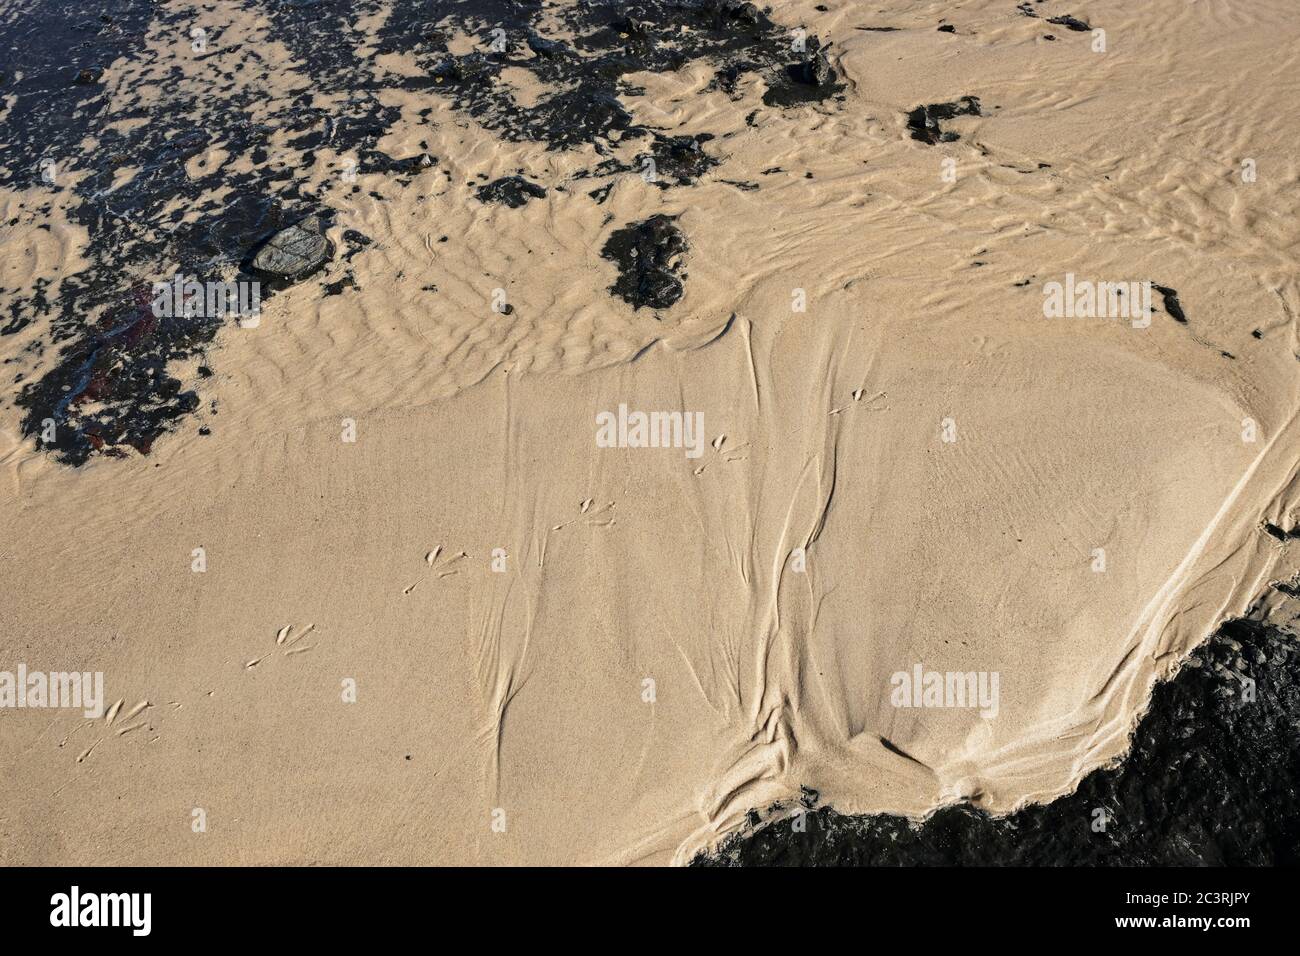 Section of wet sand with ripples created by the waves and bird footprints showing. Stock Photo